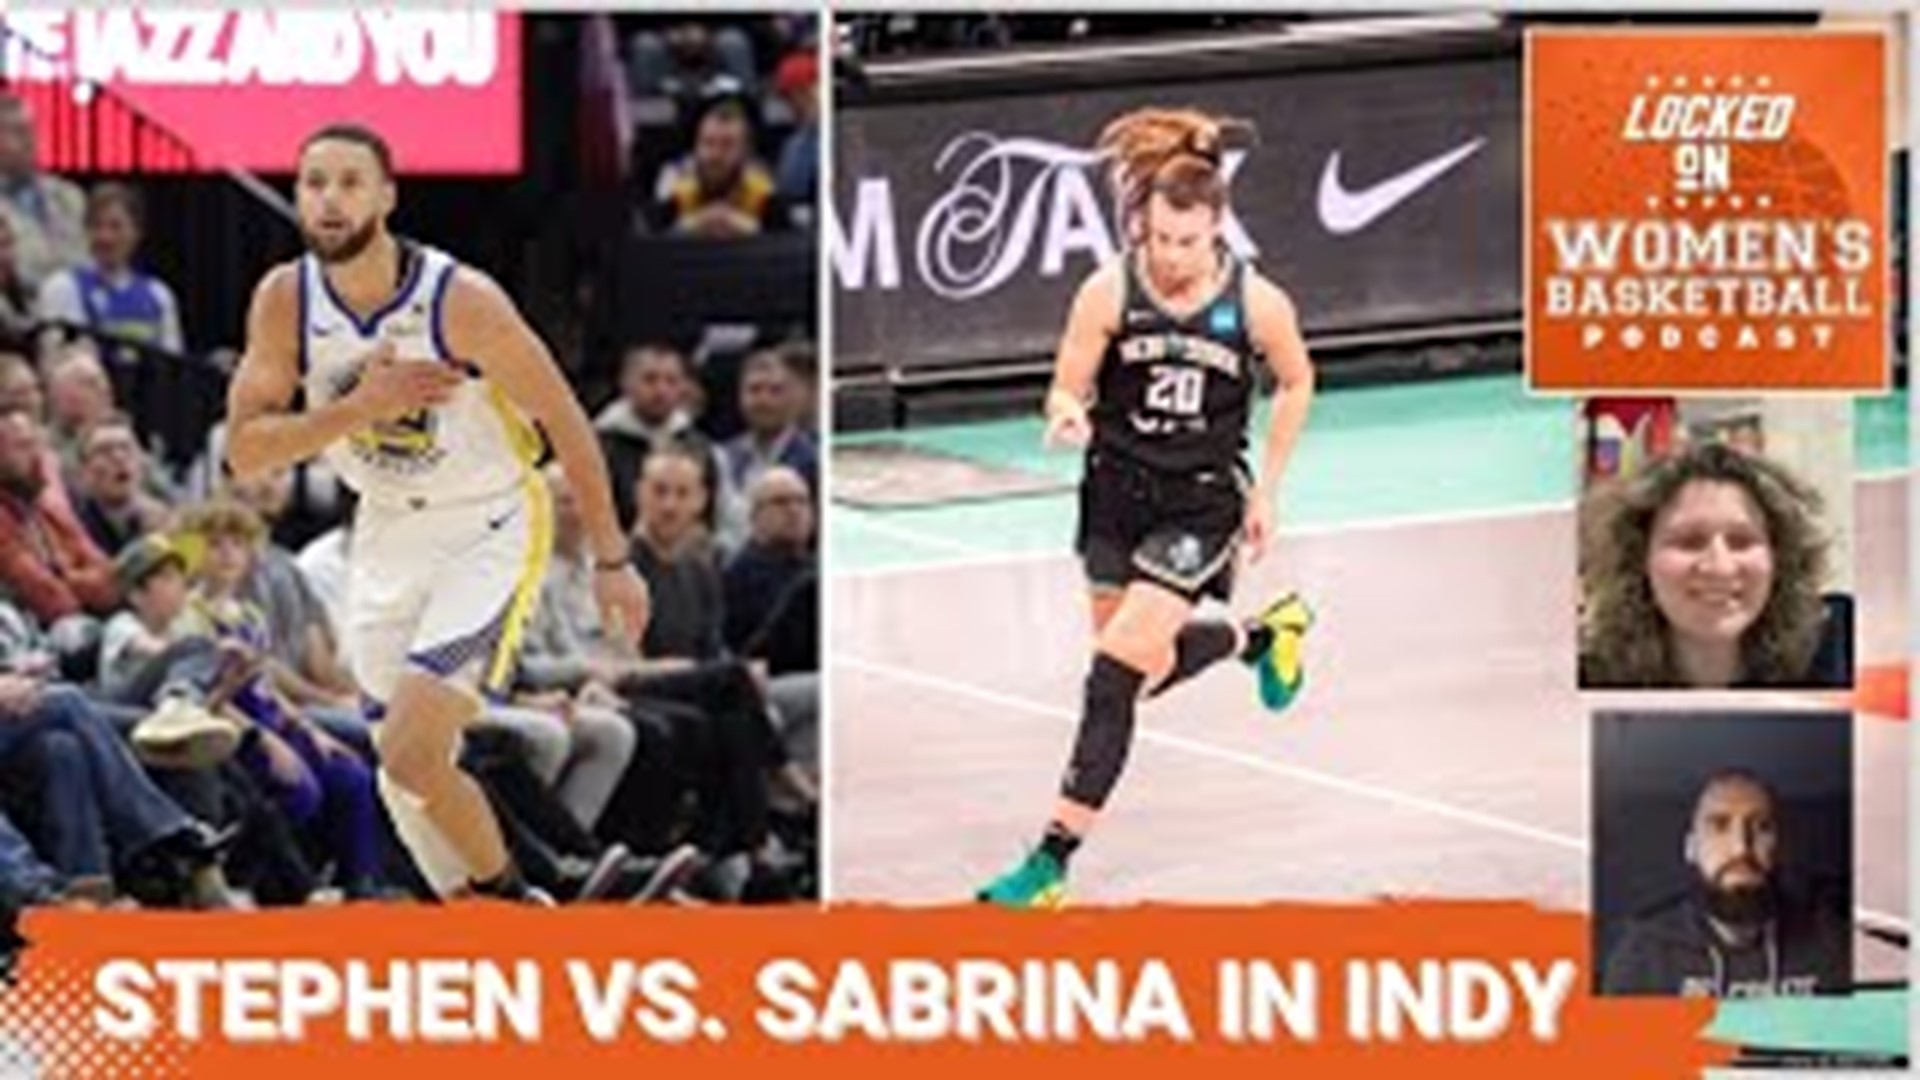 Host Jackie Powell is joined by Sam Gordon, Golden State Warriors beat writer at the San Francisco Chronicle to preview the Stephen vs. Sabrina 3-point shootout.